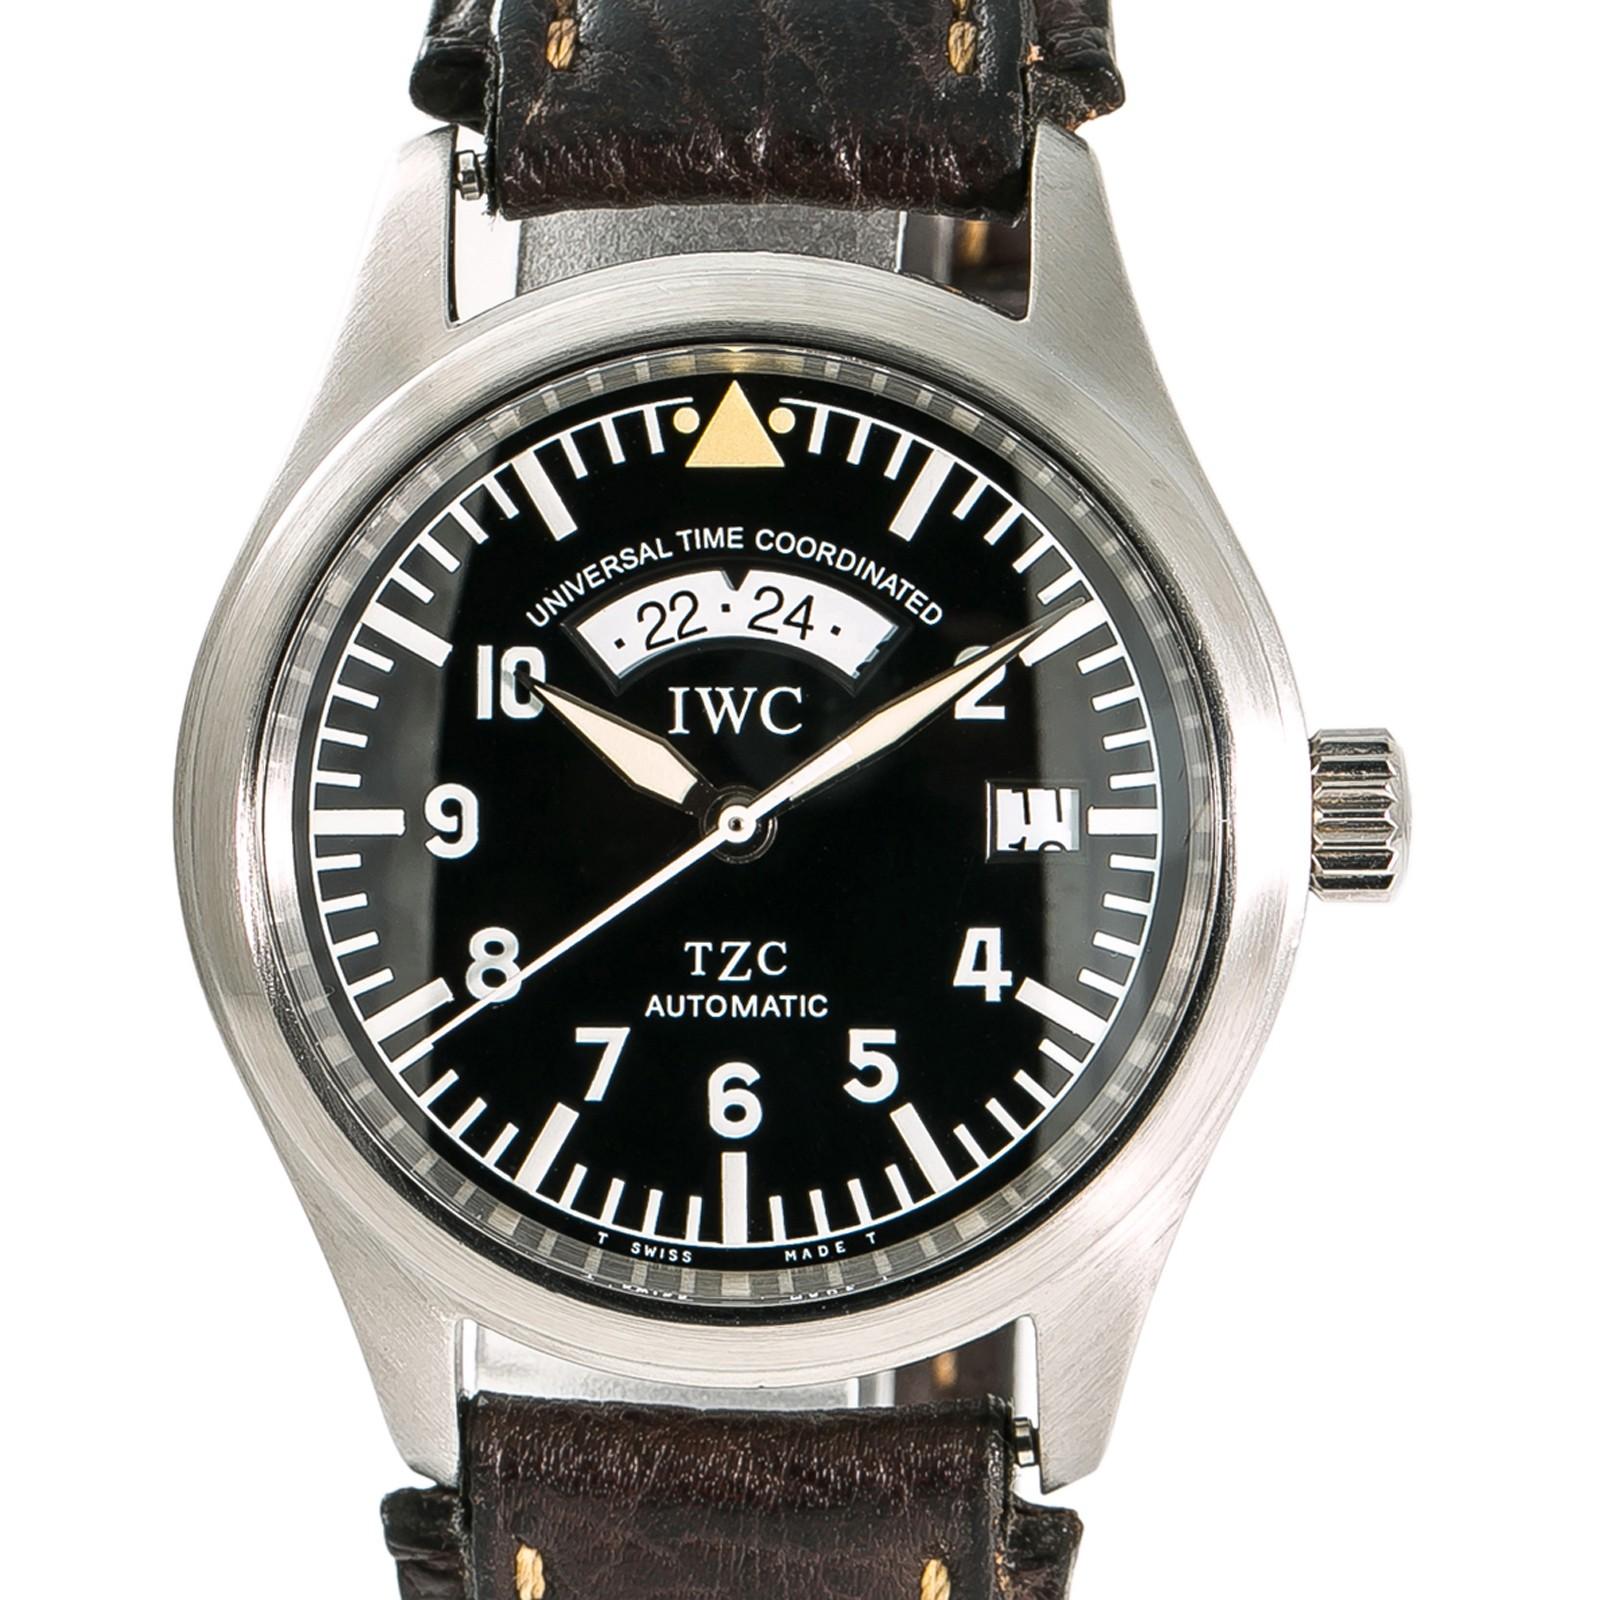 Contemporary IWC Spitfire UTC 3251 TZC Men’s Automatic Watch Black Dial Stainless Steel